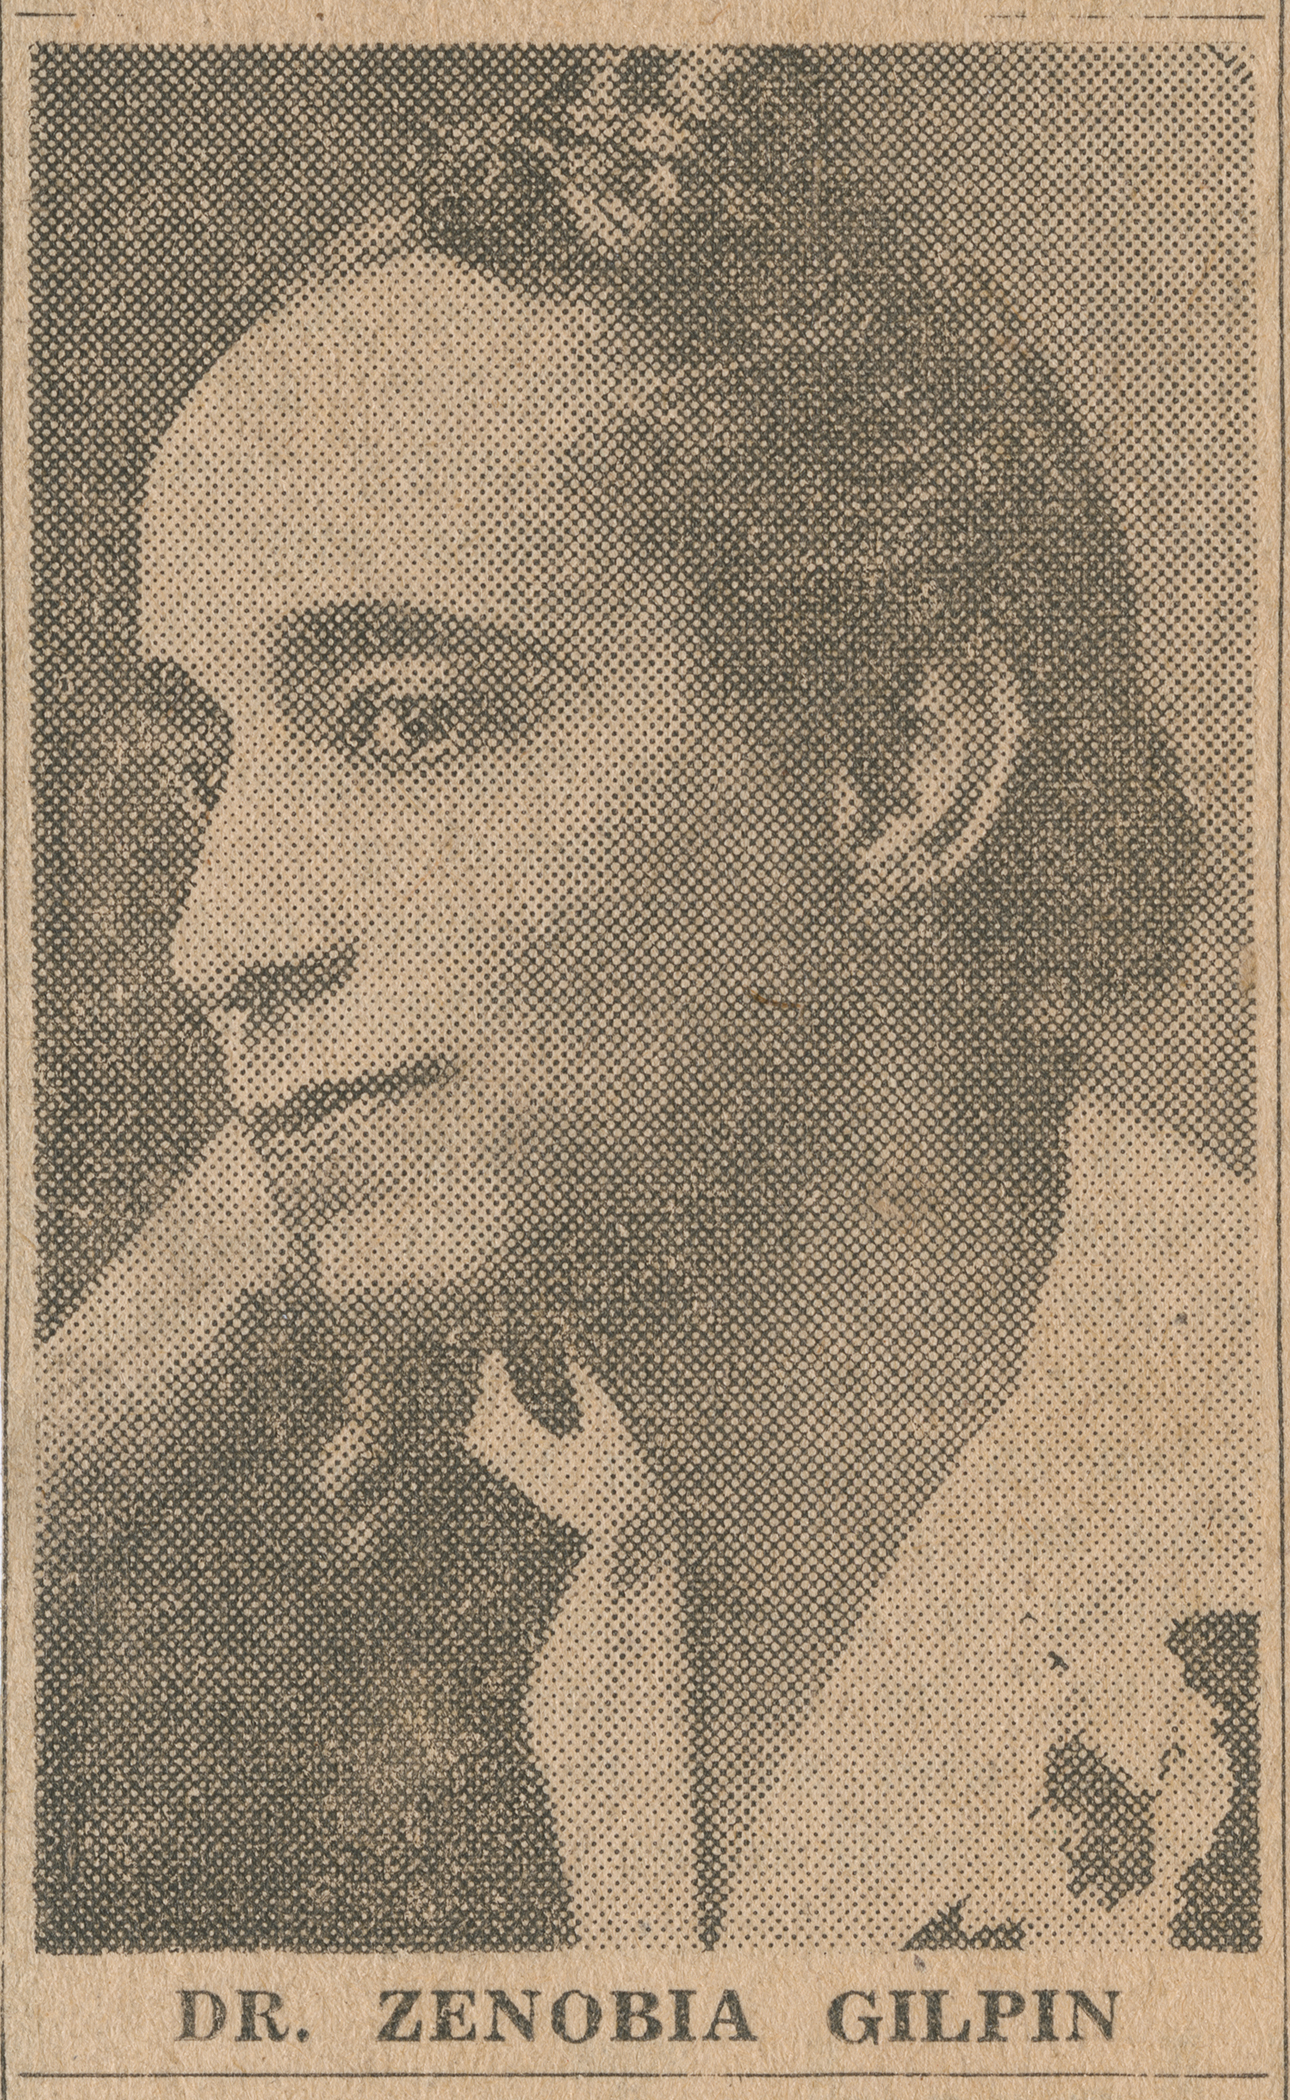 A newspaper photograph of Dr. Zenobia Gilpin